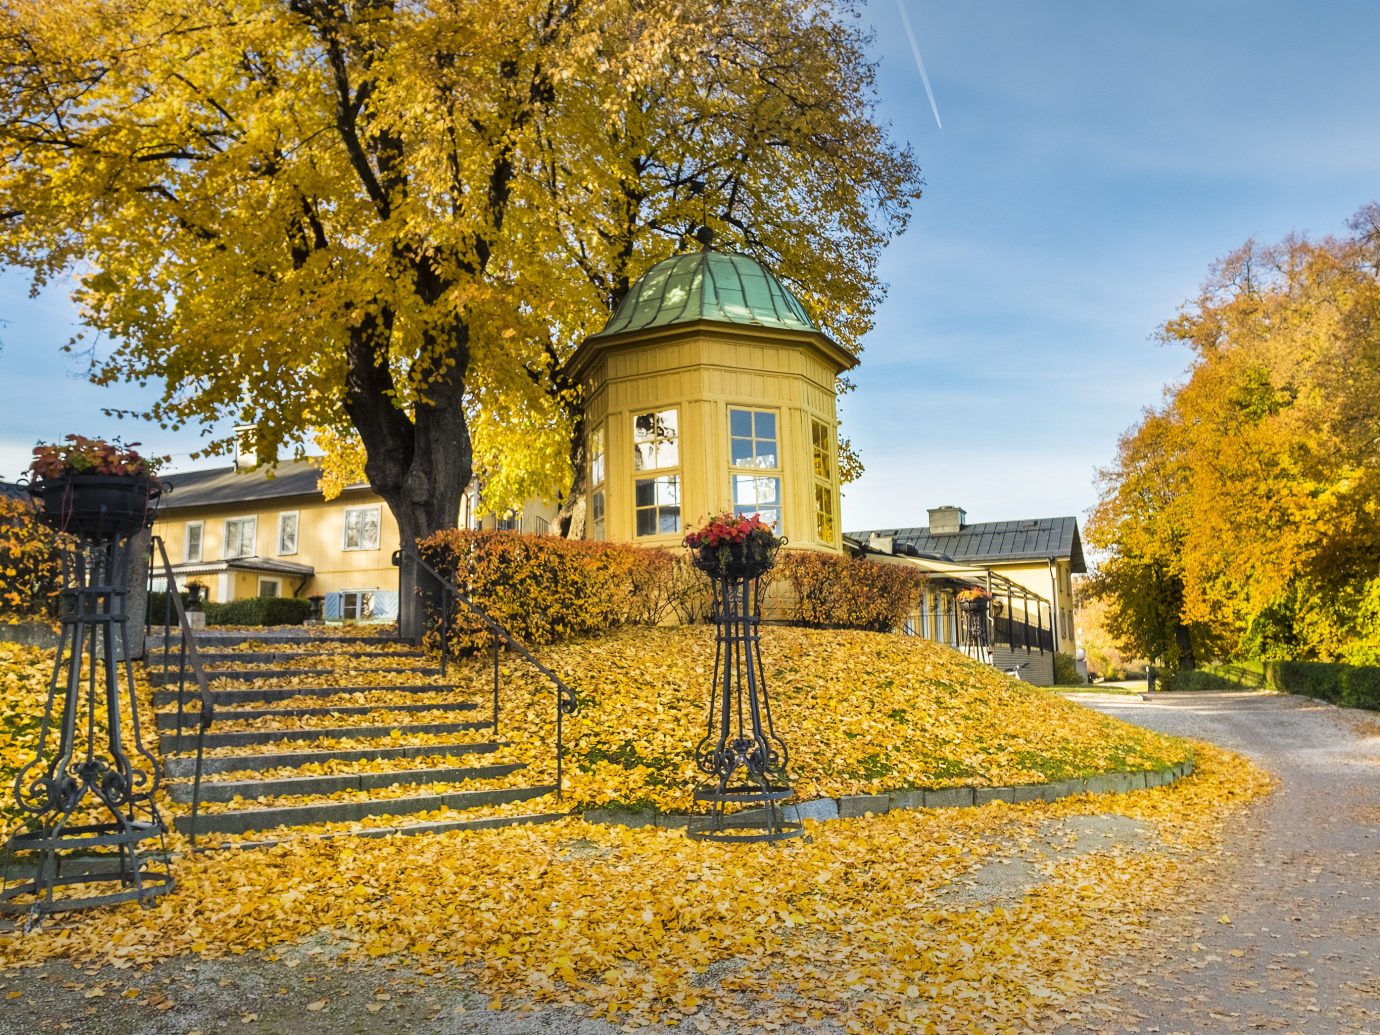 Hotels Stockholm Sweden tree outdoor sky leaf yellow Nature autumn landmark woody plant estate house plant home château stately home real estate sunlight tourist attraction landscape facade grass cottage manor house branch maidenhair tree Village